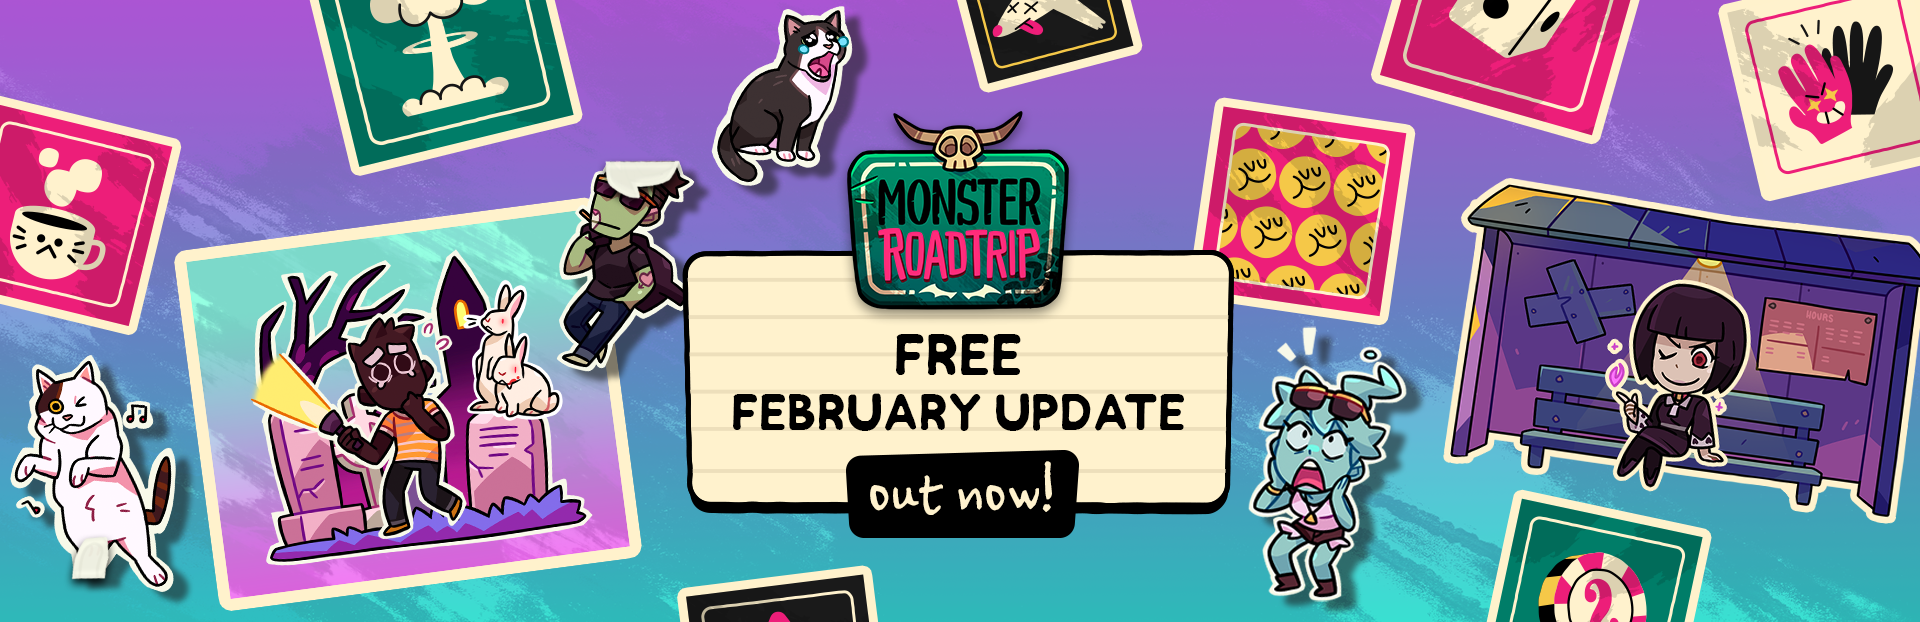 Prime's free games for February: Spinch, Monster Prom, and 6 more  free this month